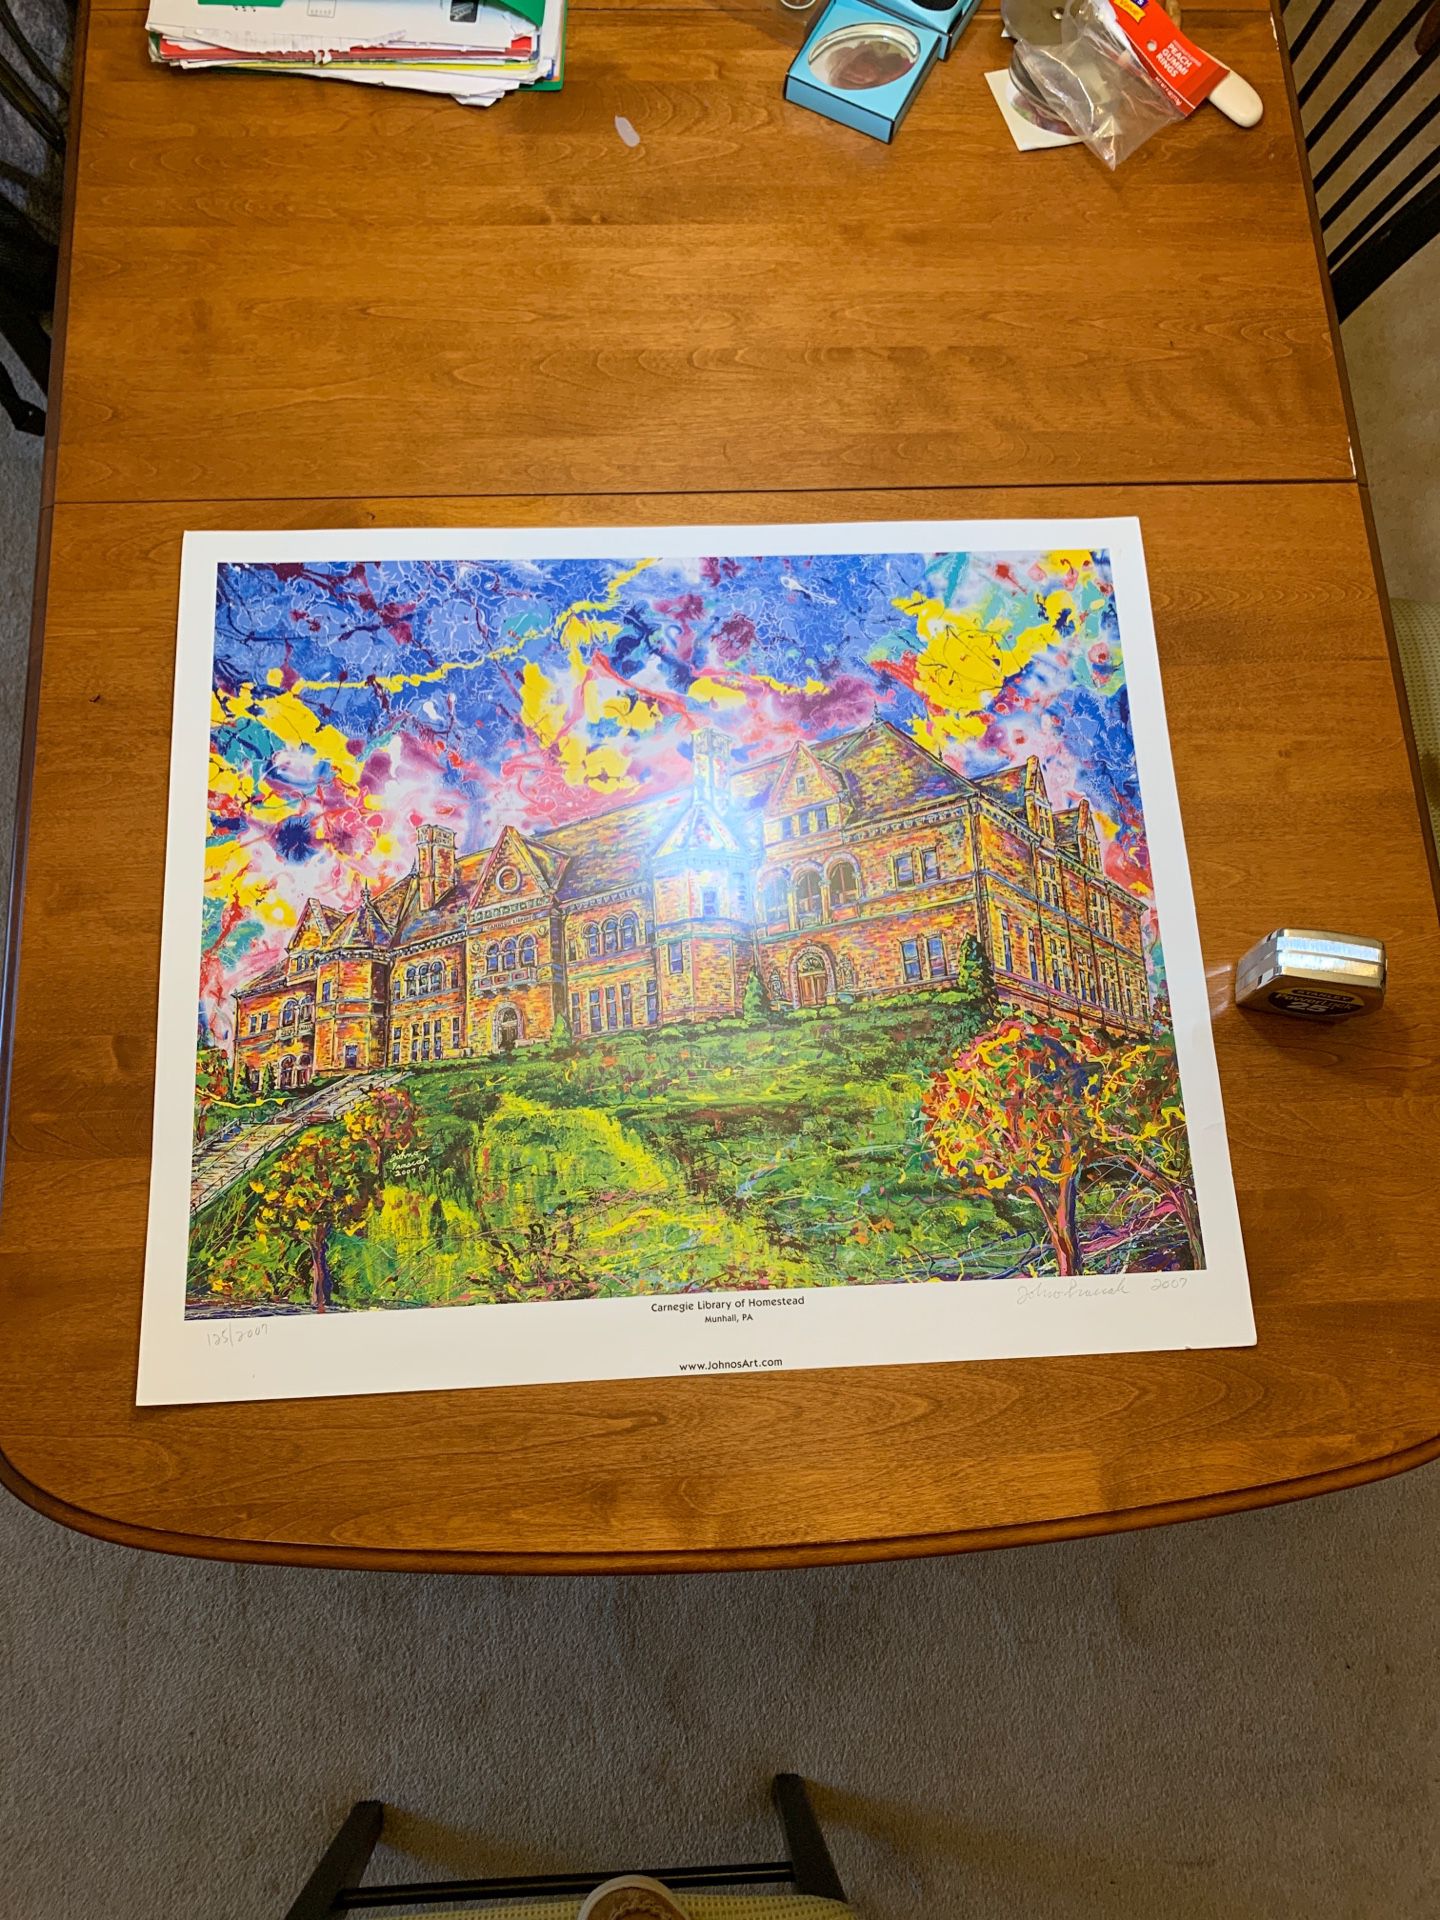 Amazing 28”X24” Large Carnegie library of homestead Print